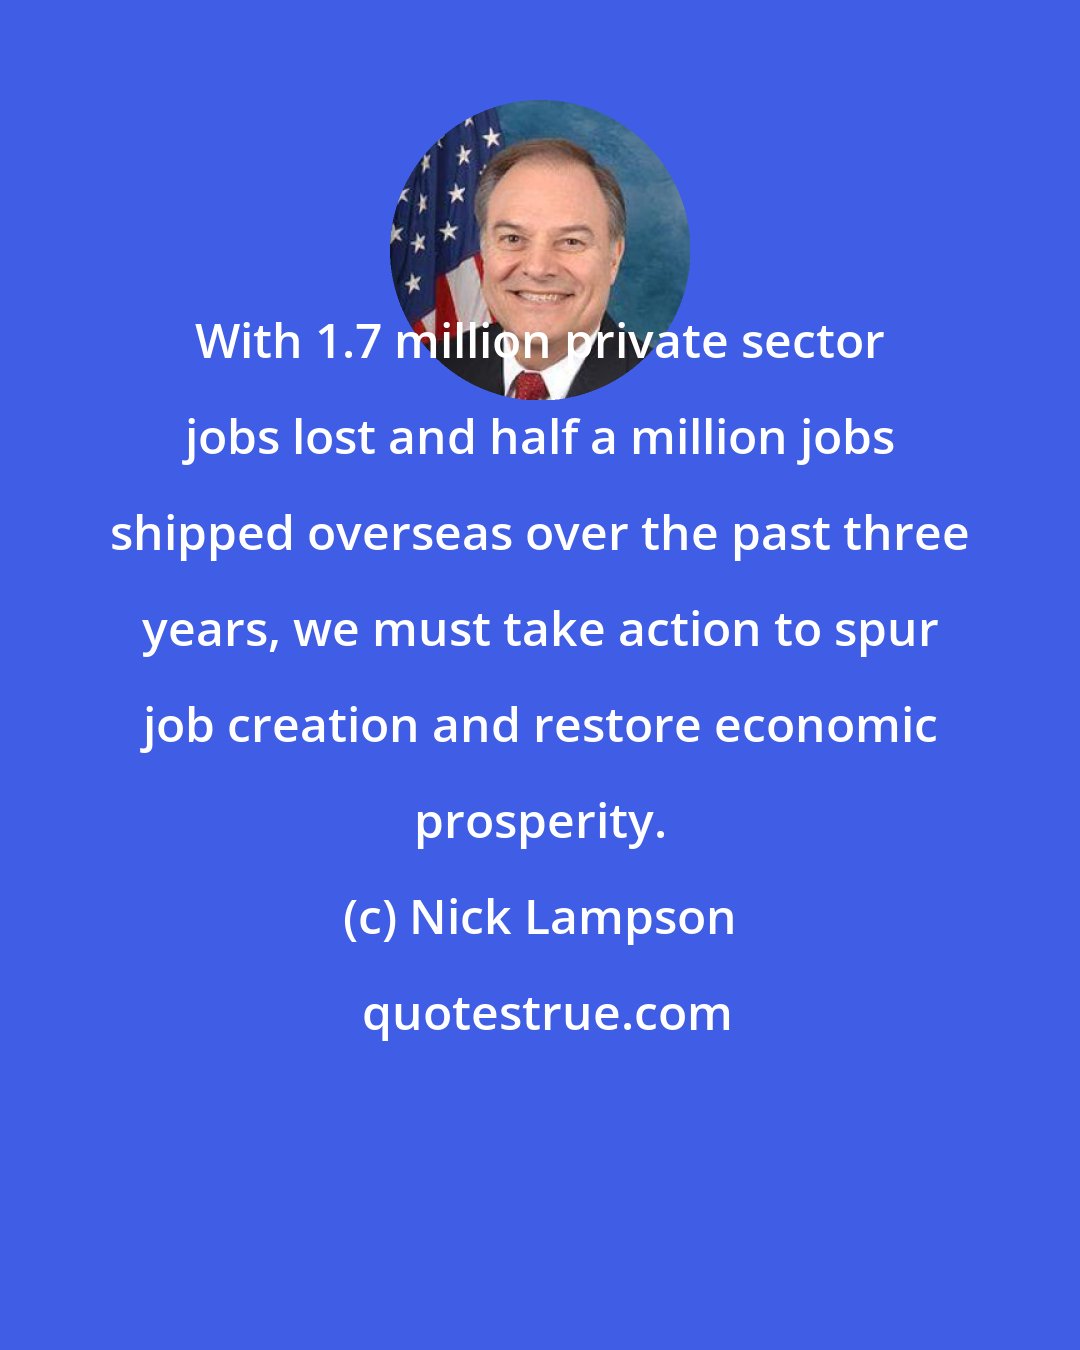 Nick Lampson: With 1.7 million private sector jobs lost and half a million jobs shipped overseas over the past three years, we must take action to spur job creation and restore economic prosperity.